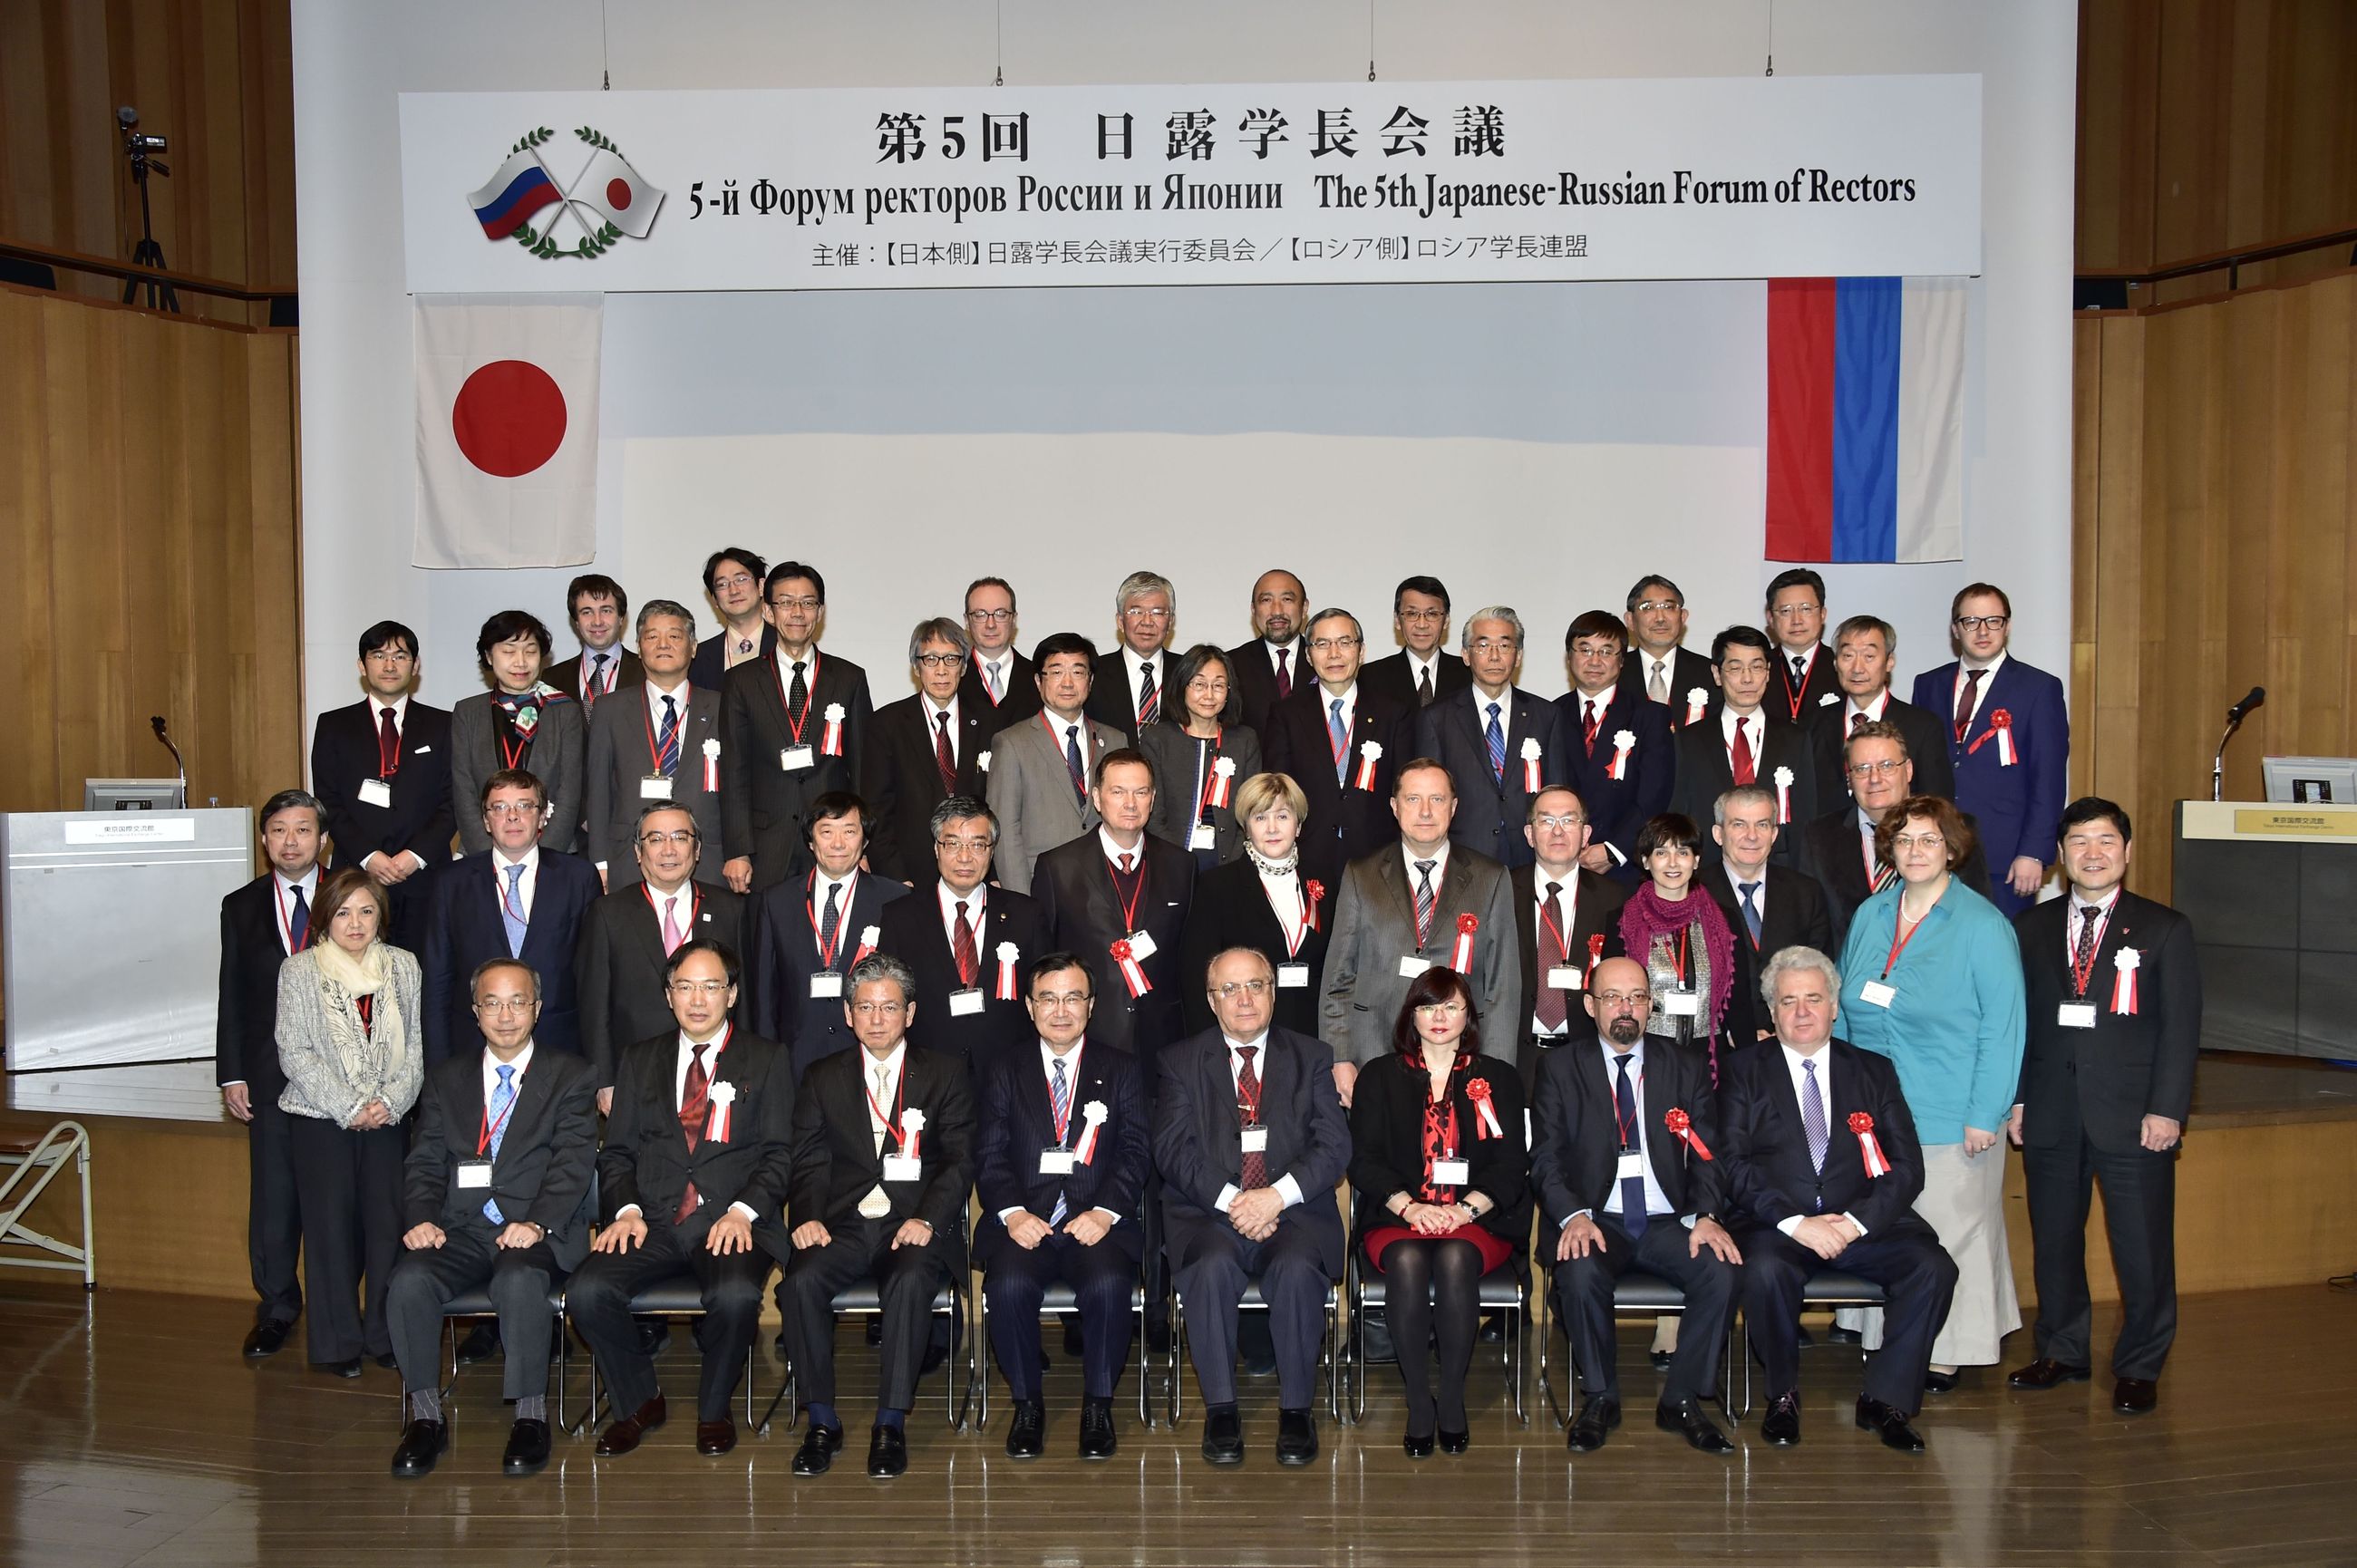 Forum of Rectors of Russia and Japan: results for the Udmurt Republic